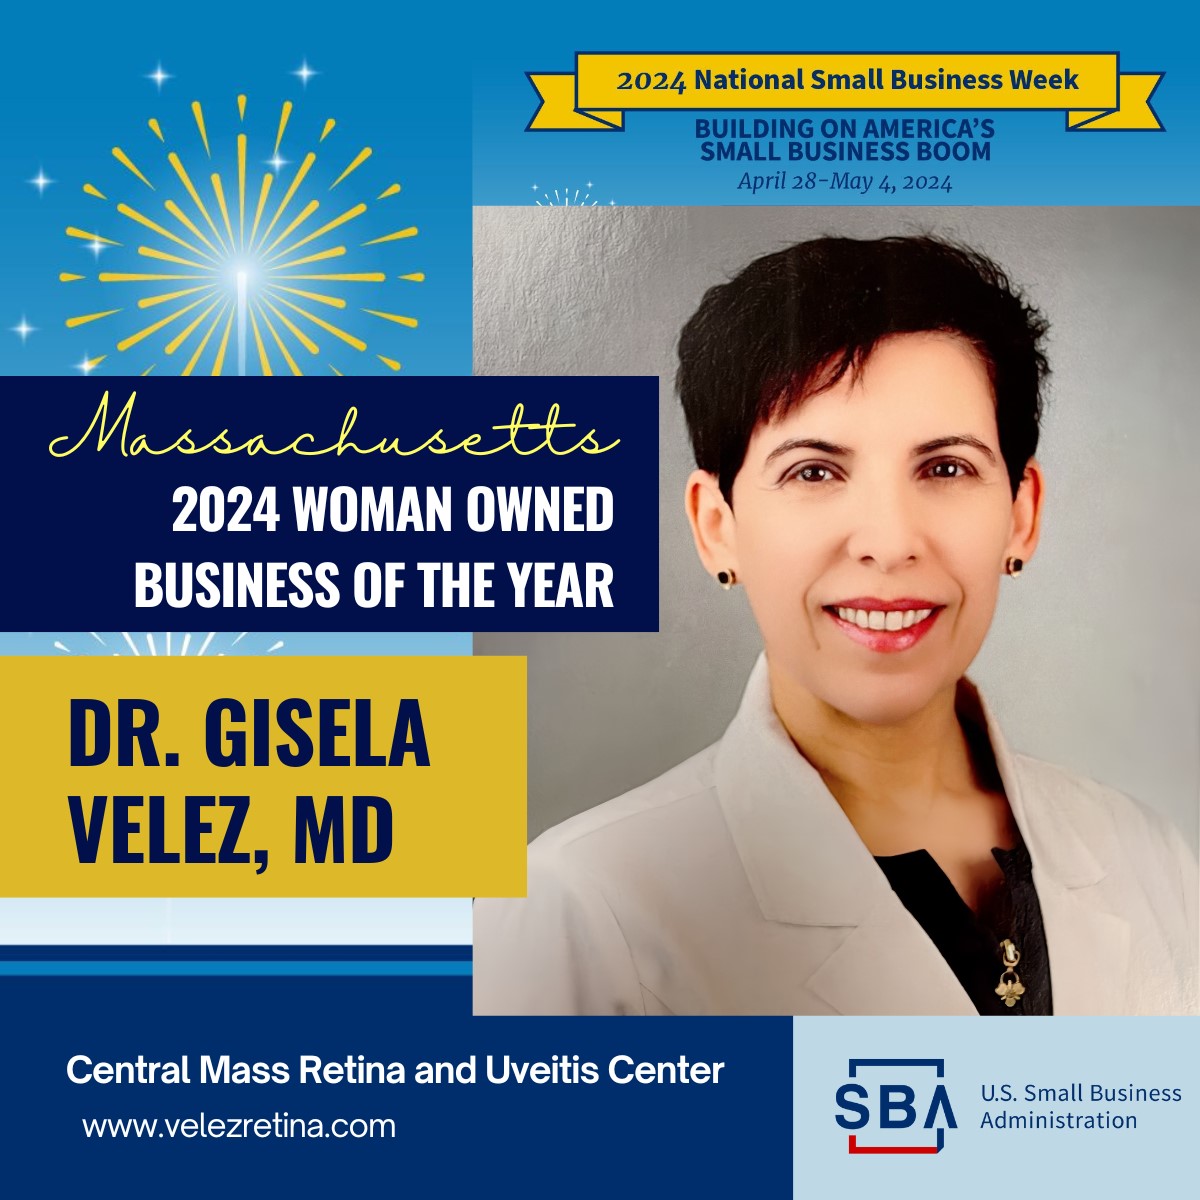 🏆 Congratulations! The 2024 #Massachusetts Woman Owned Business of the Year is Dr. Gisela Velez, Owner of Central Mass Retina and Uveitis Center #SmallBusinessWeek